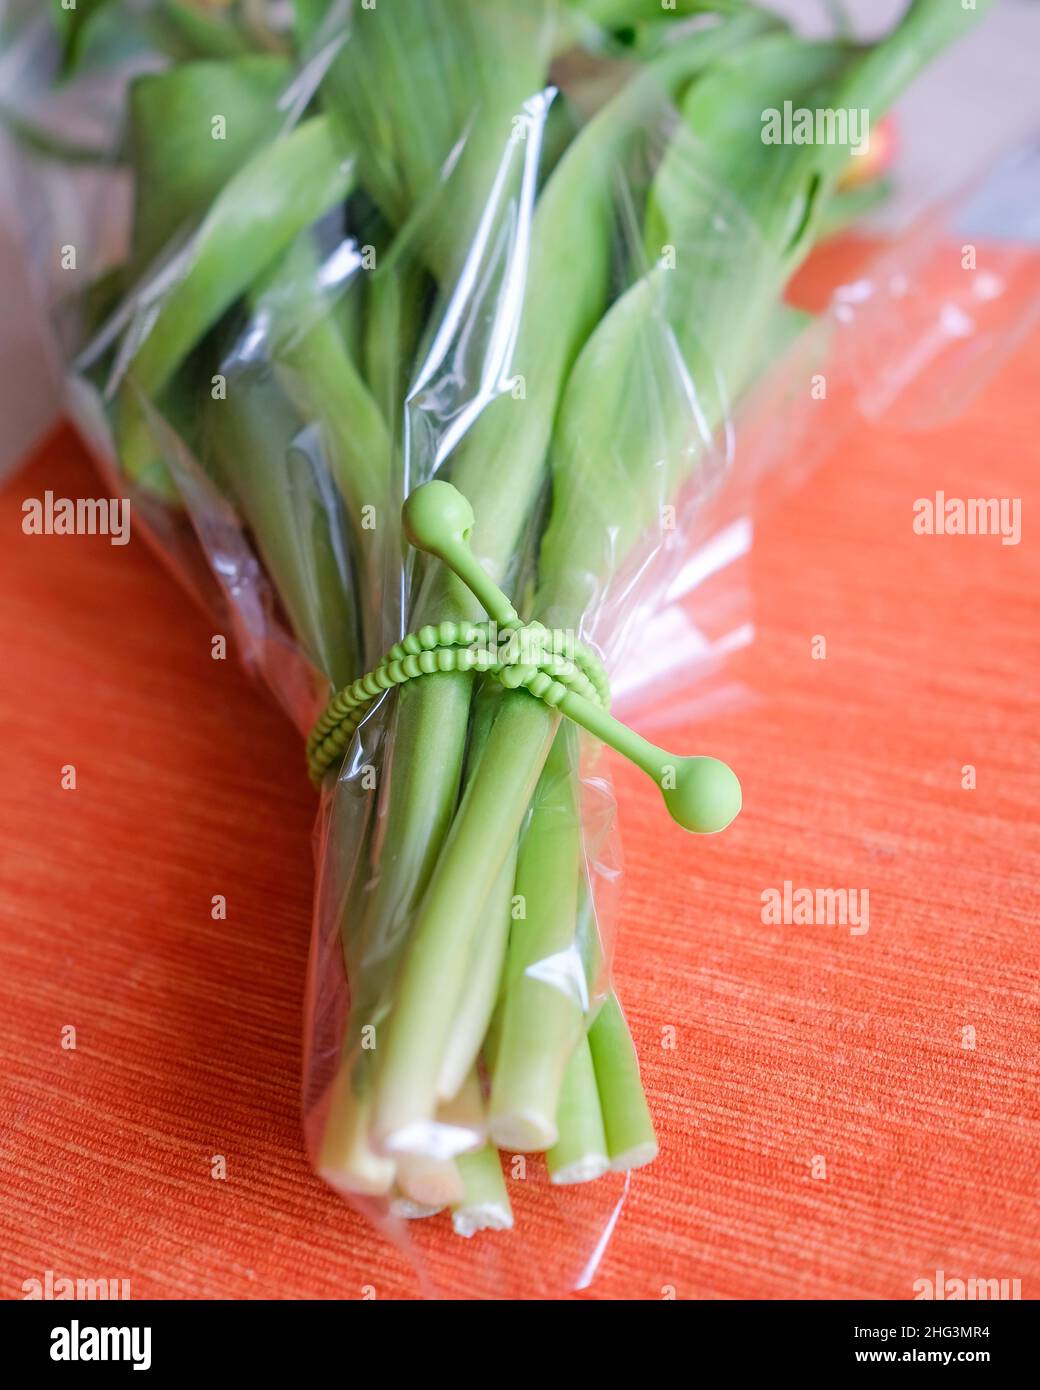 The bouquet was tied with a silicone cord. Stock Photo